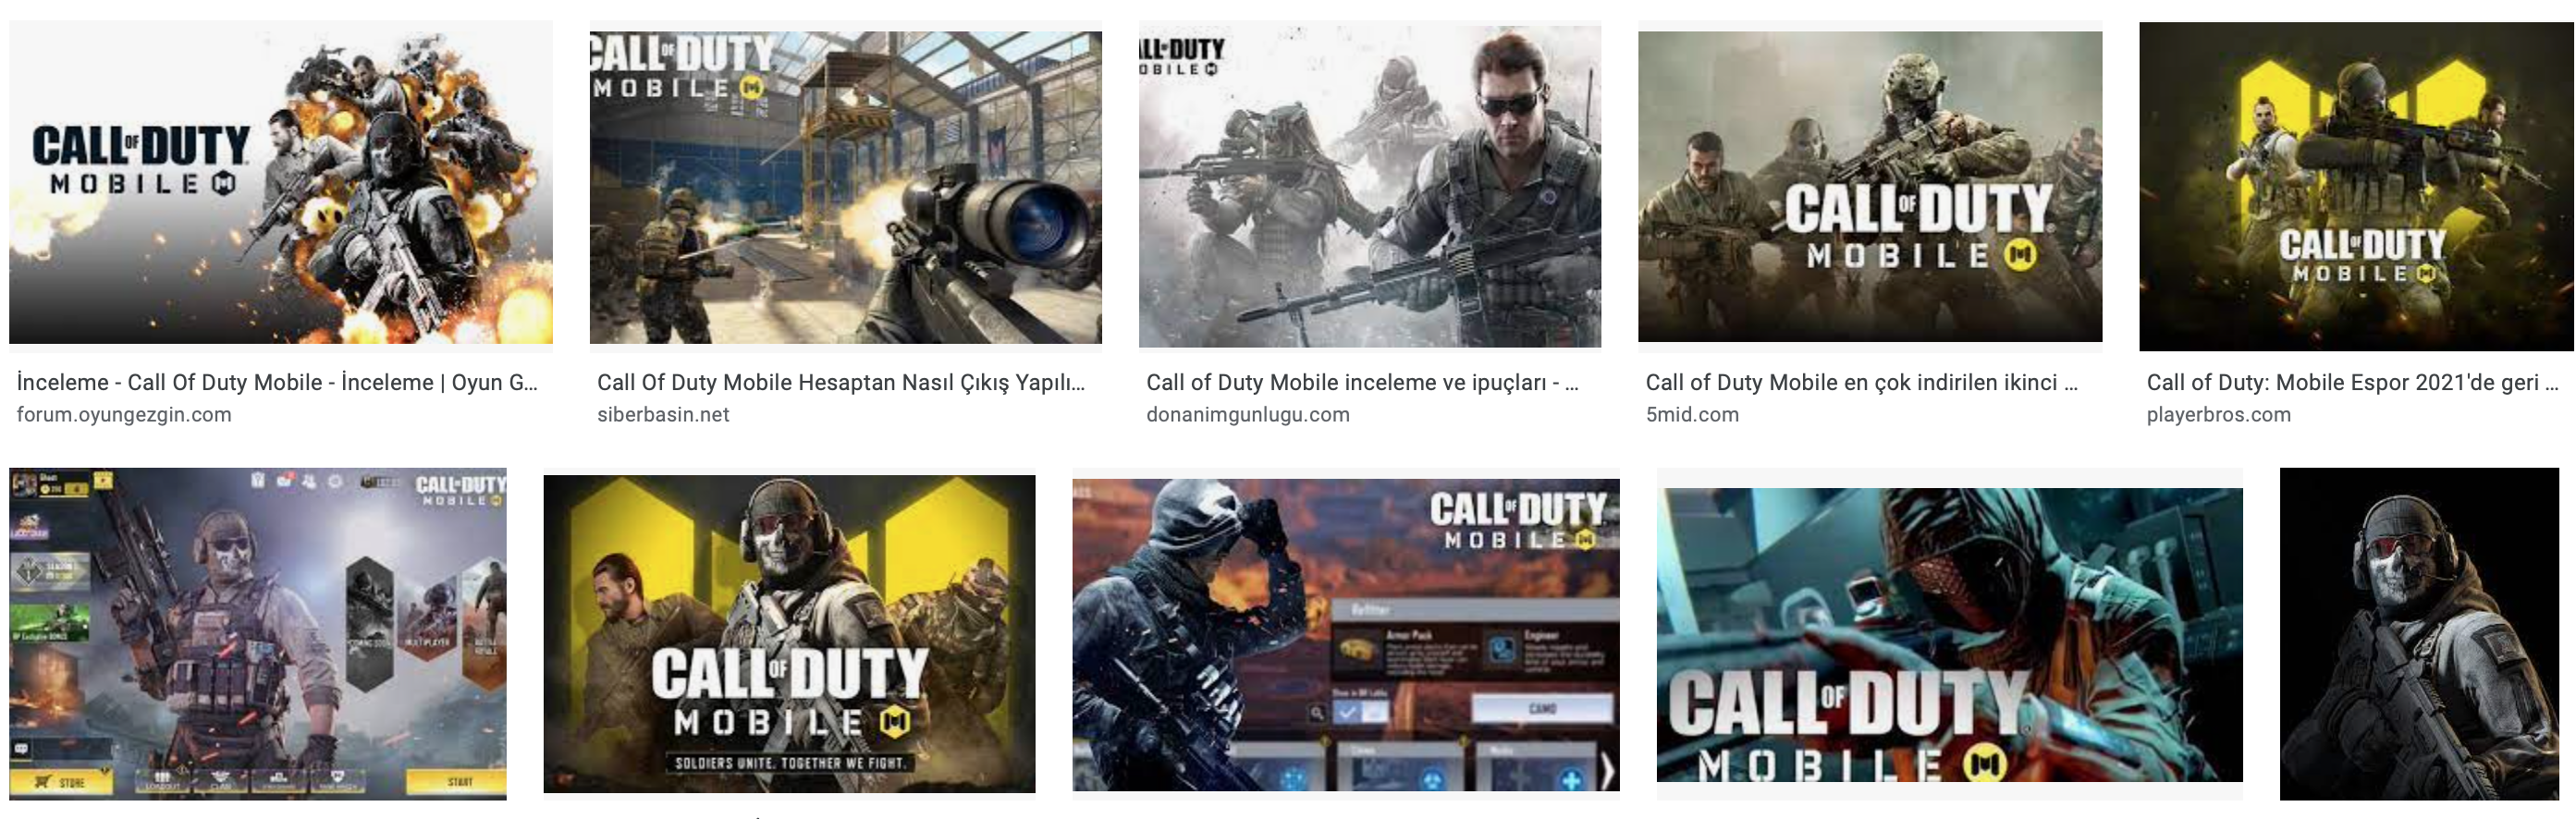 Call Of Duty Mobile Apk 2021** 1.0.26